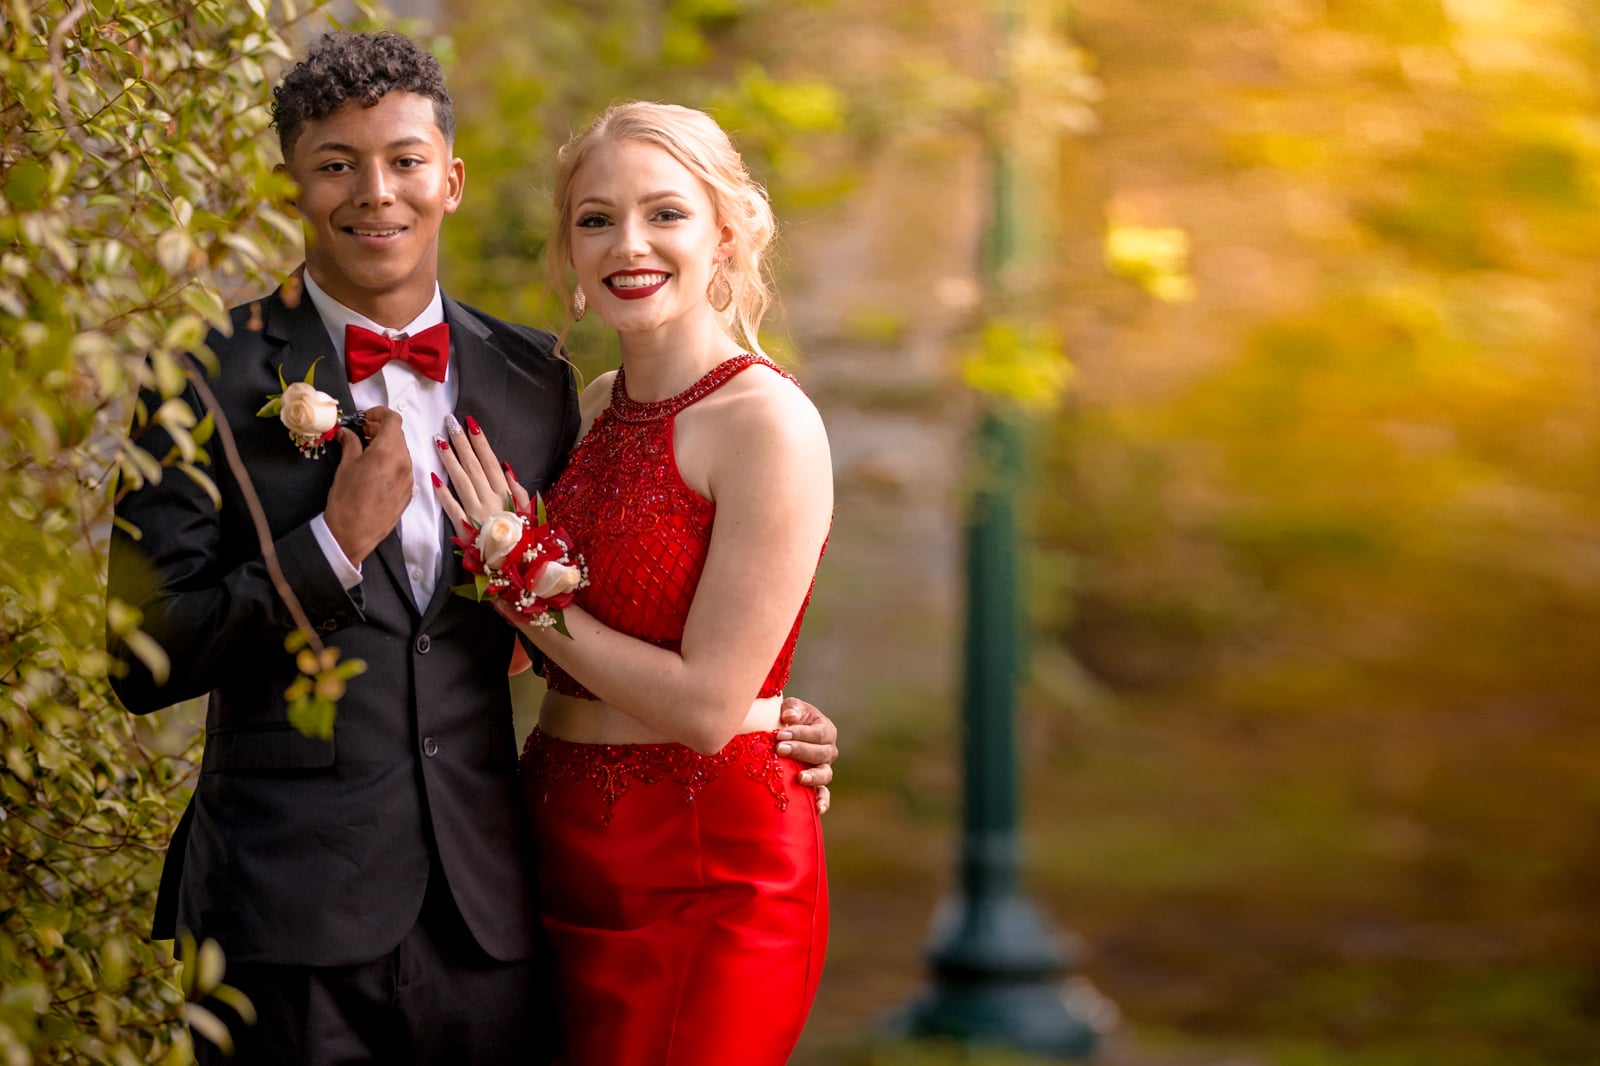 The Perfect Prom Proposal: Flowers And A Poster Or Just Ask?